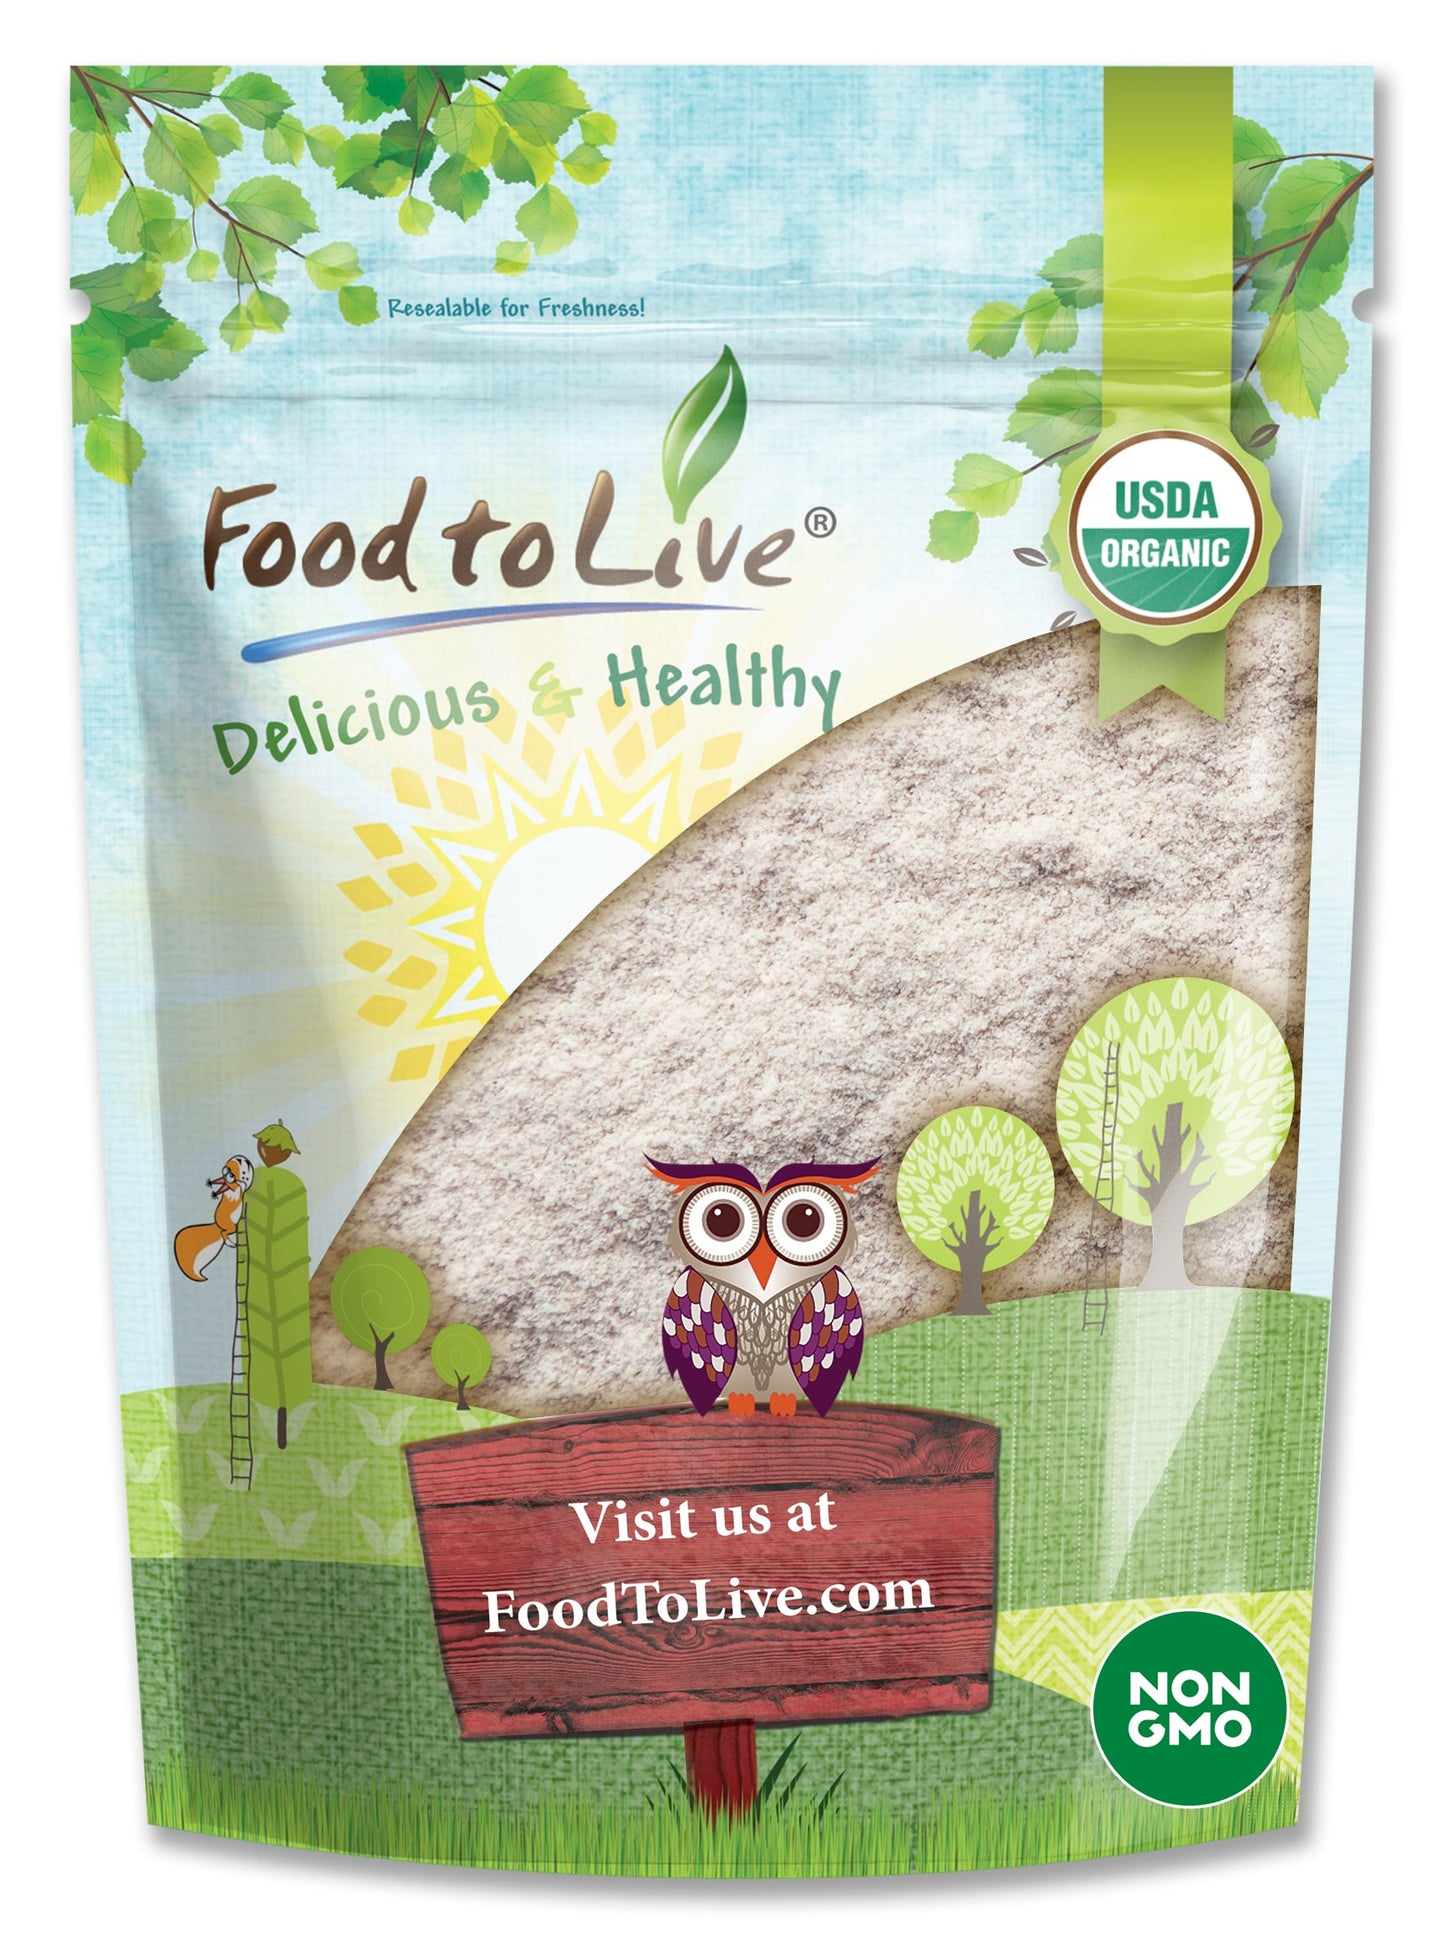 Certified Gluten Free Organic Brown Rice Flour – Non-GMO Whole Grain Flour, Fine Meal, Vegan, Bulk. Rich in Fiber. Great for Cooking, Baking, and as Thickener. Made in USA